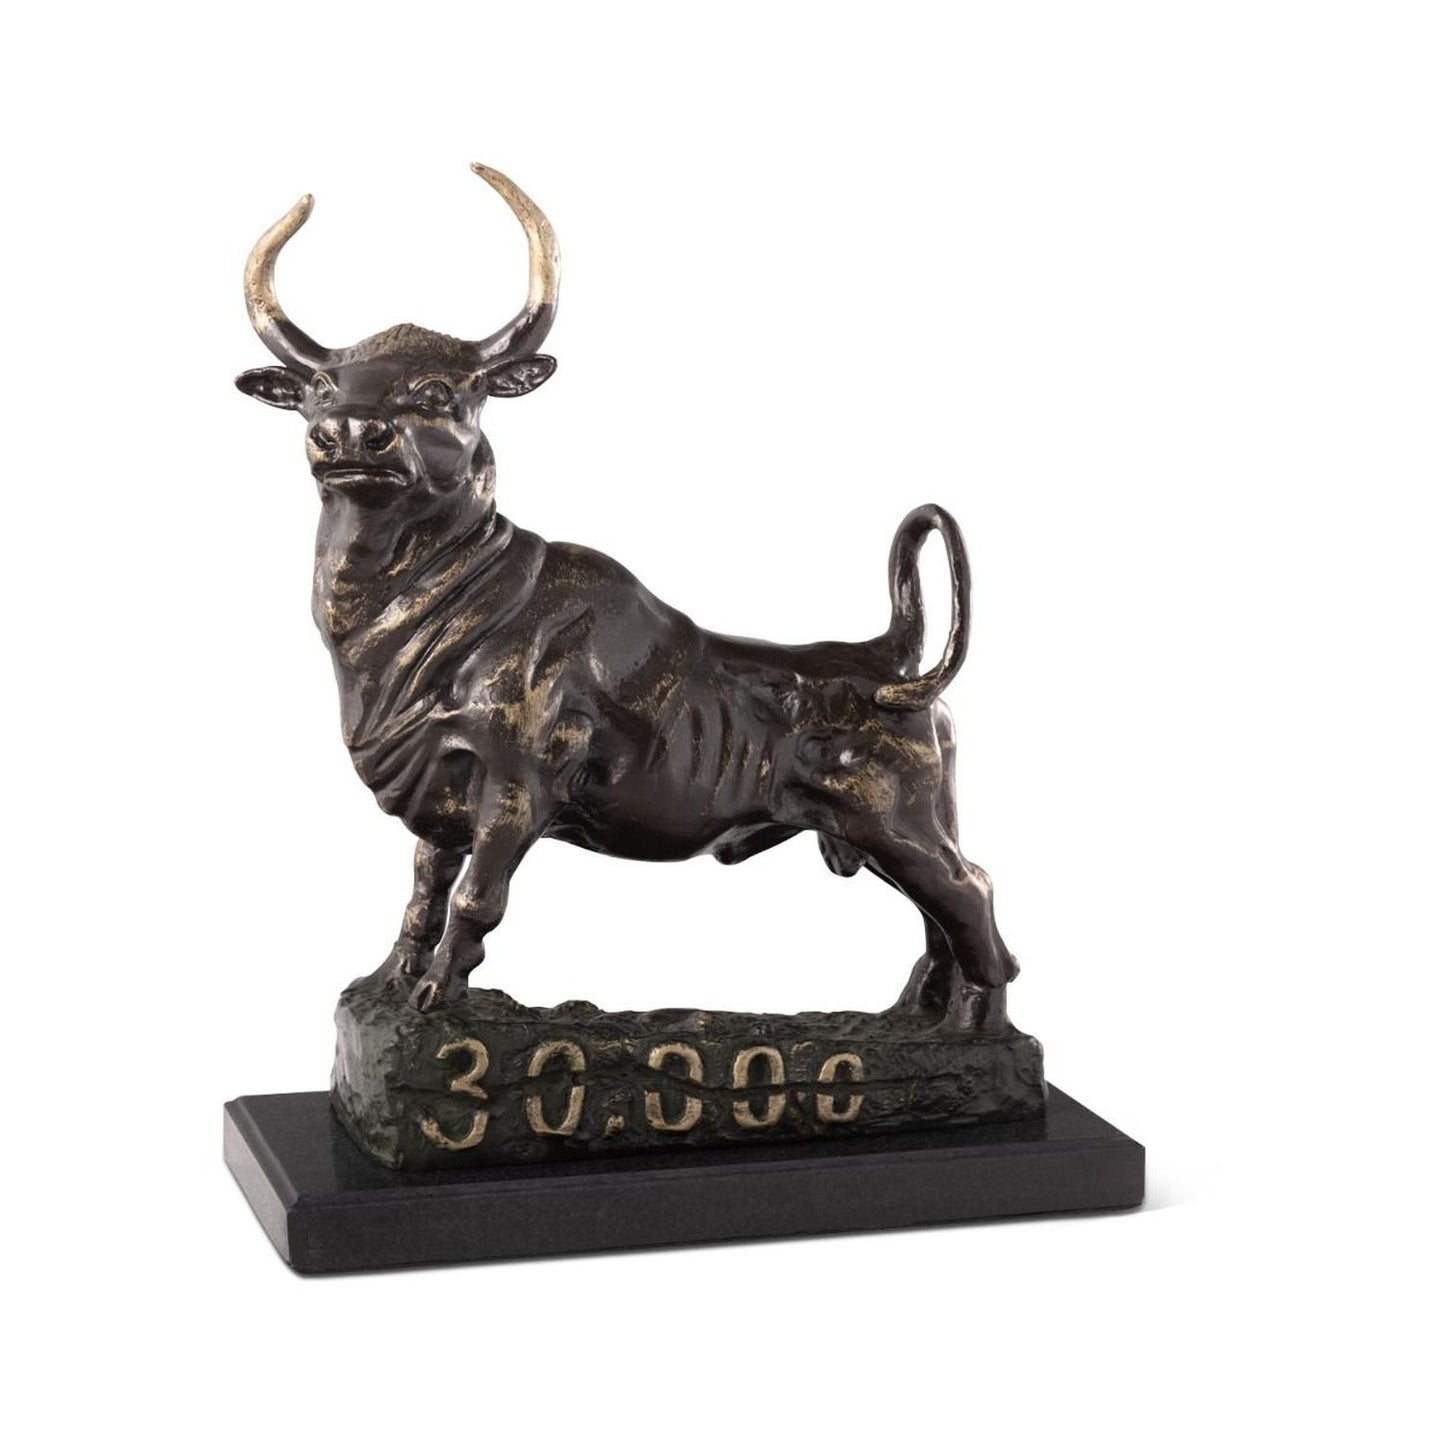 Bey Berk Bronzed Finished Bull Cracking 30,000 Mark Sculpture, Limited Edition